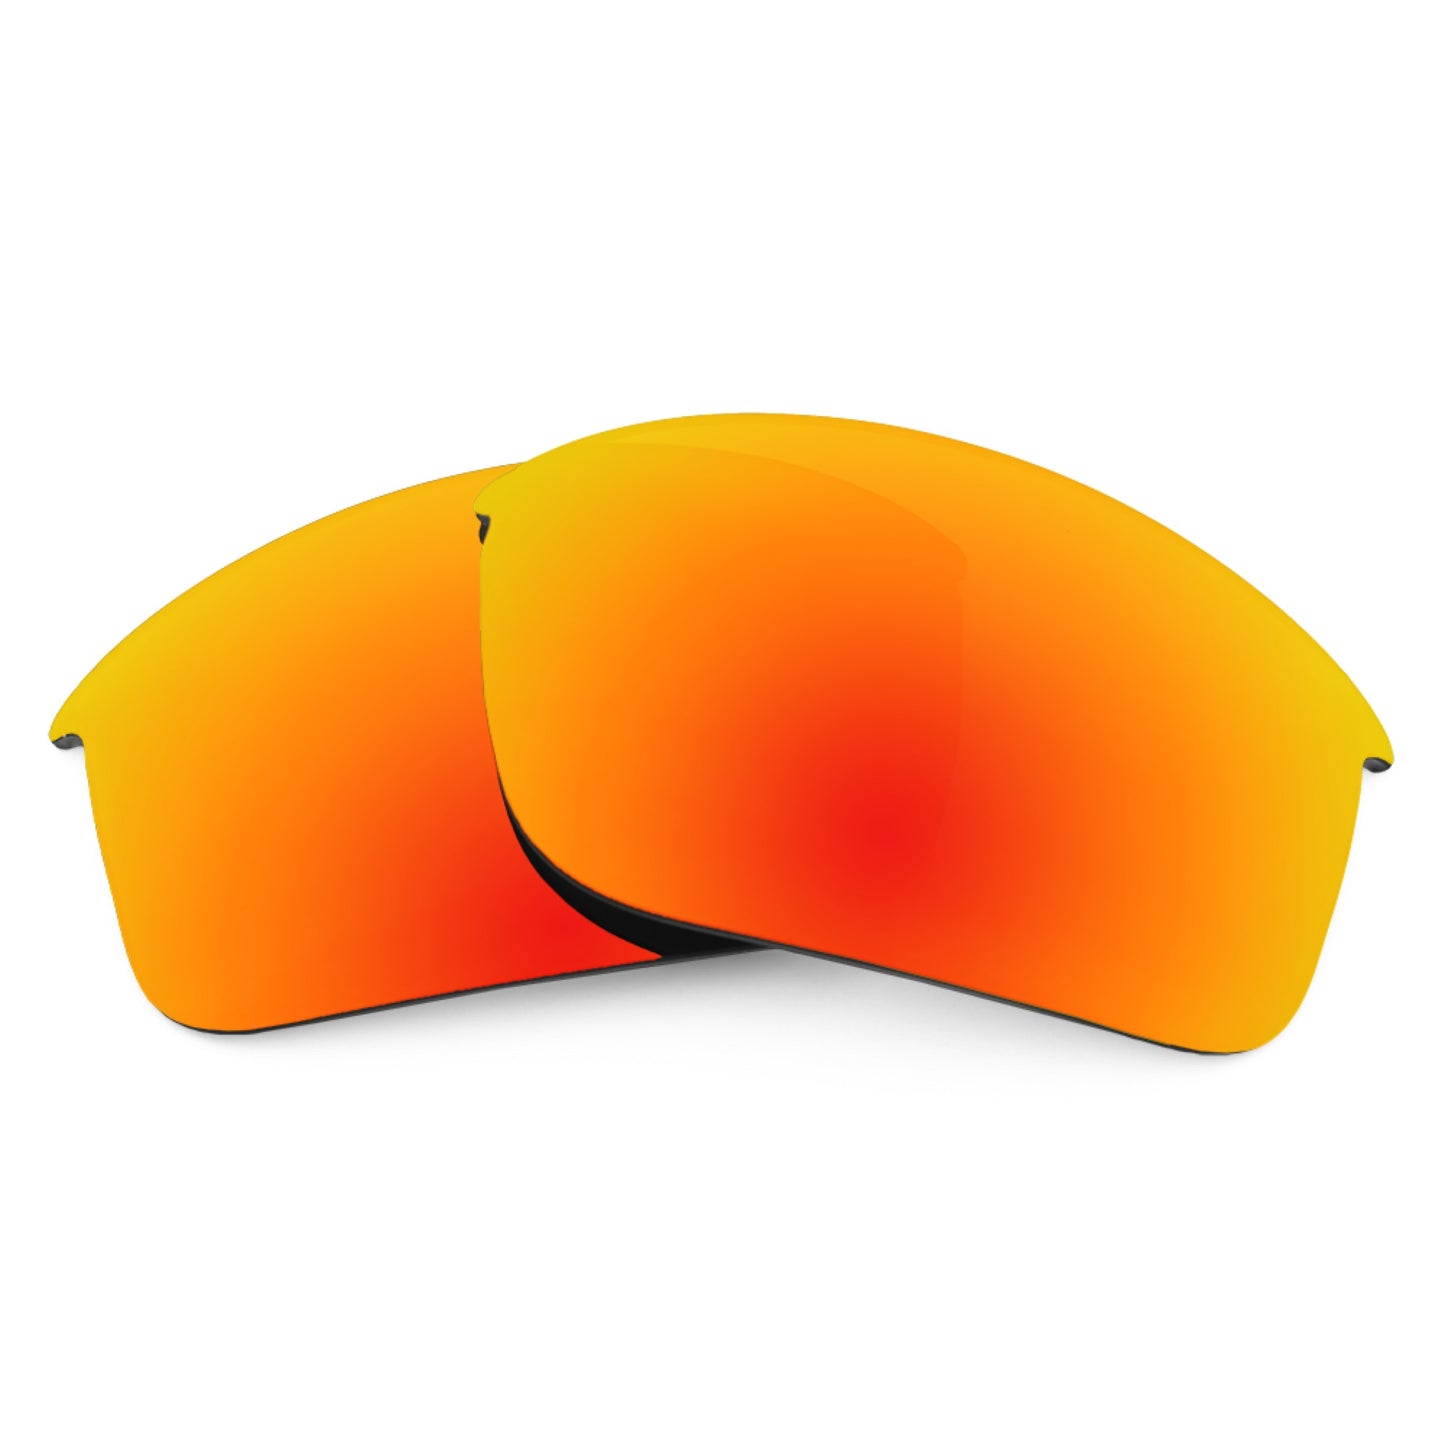 Revant replacement lenses for Oakley Sliver Edge (Low Bridge Fit) Non-Polarized Fire Red